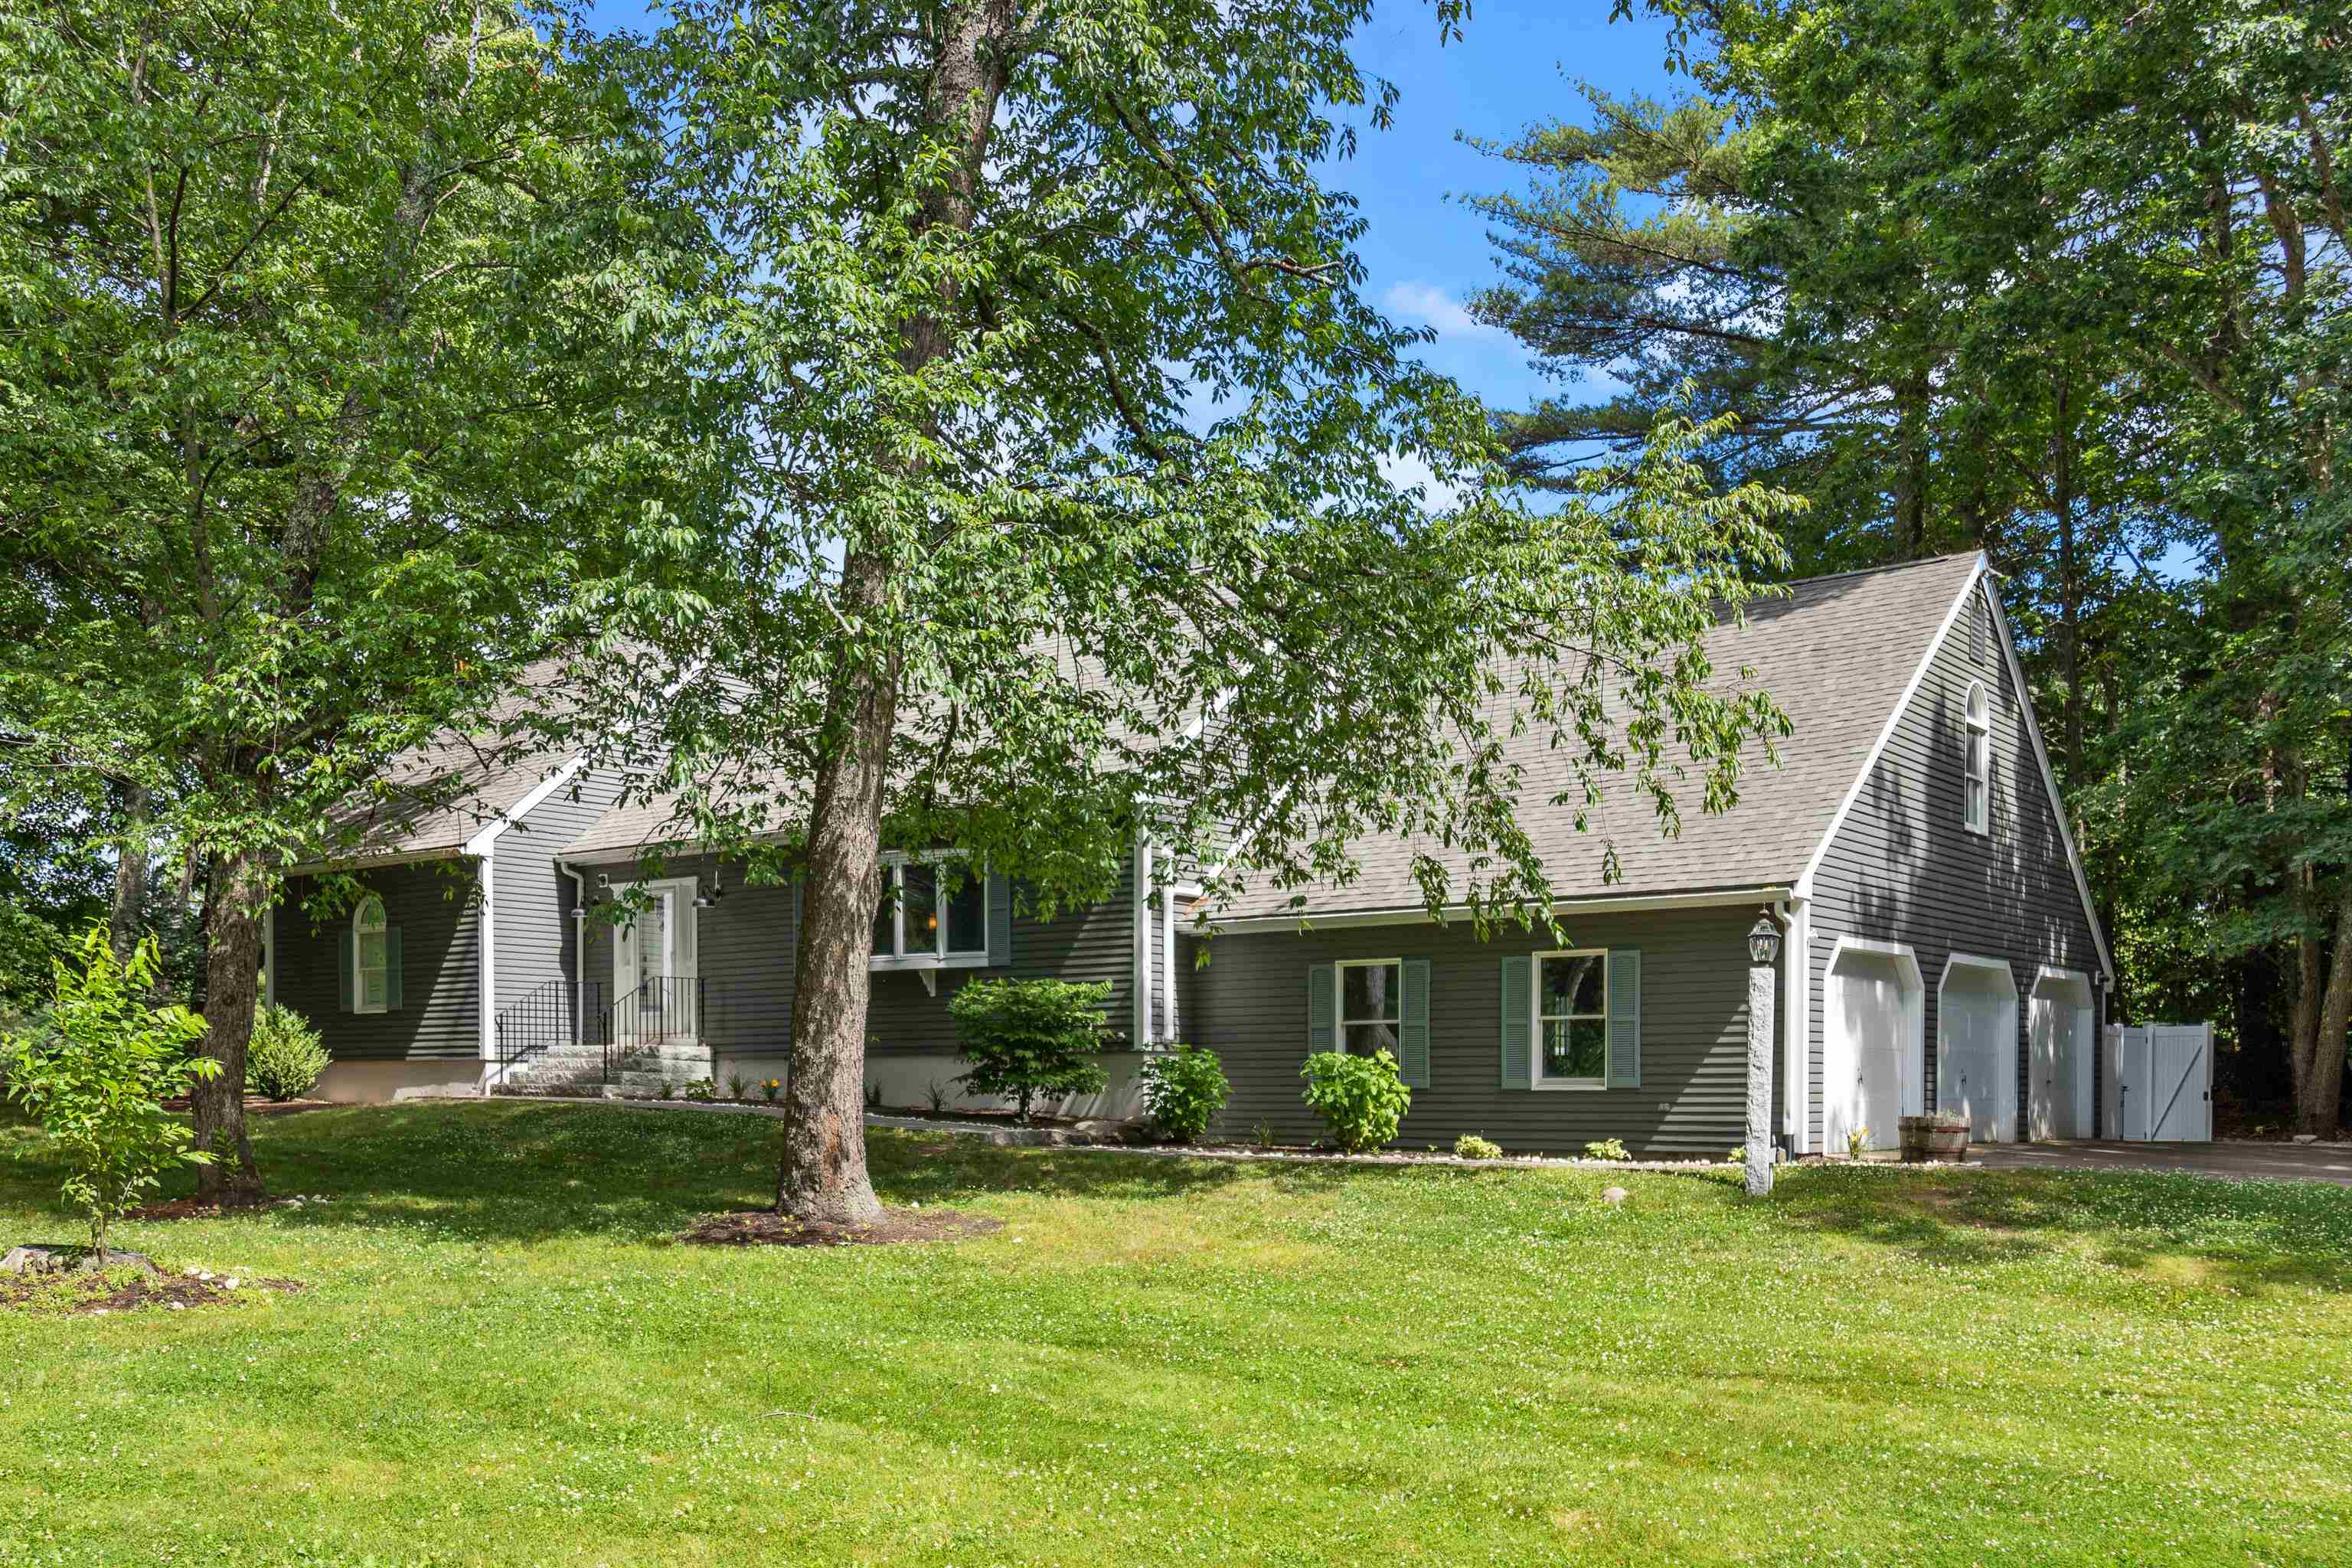 1 Humes Court, Stratham, NH 03885